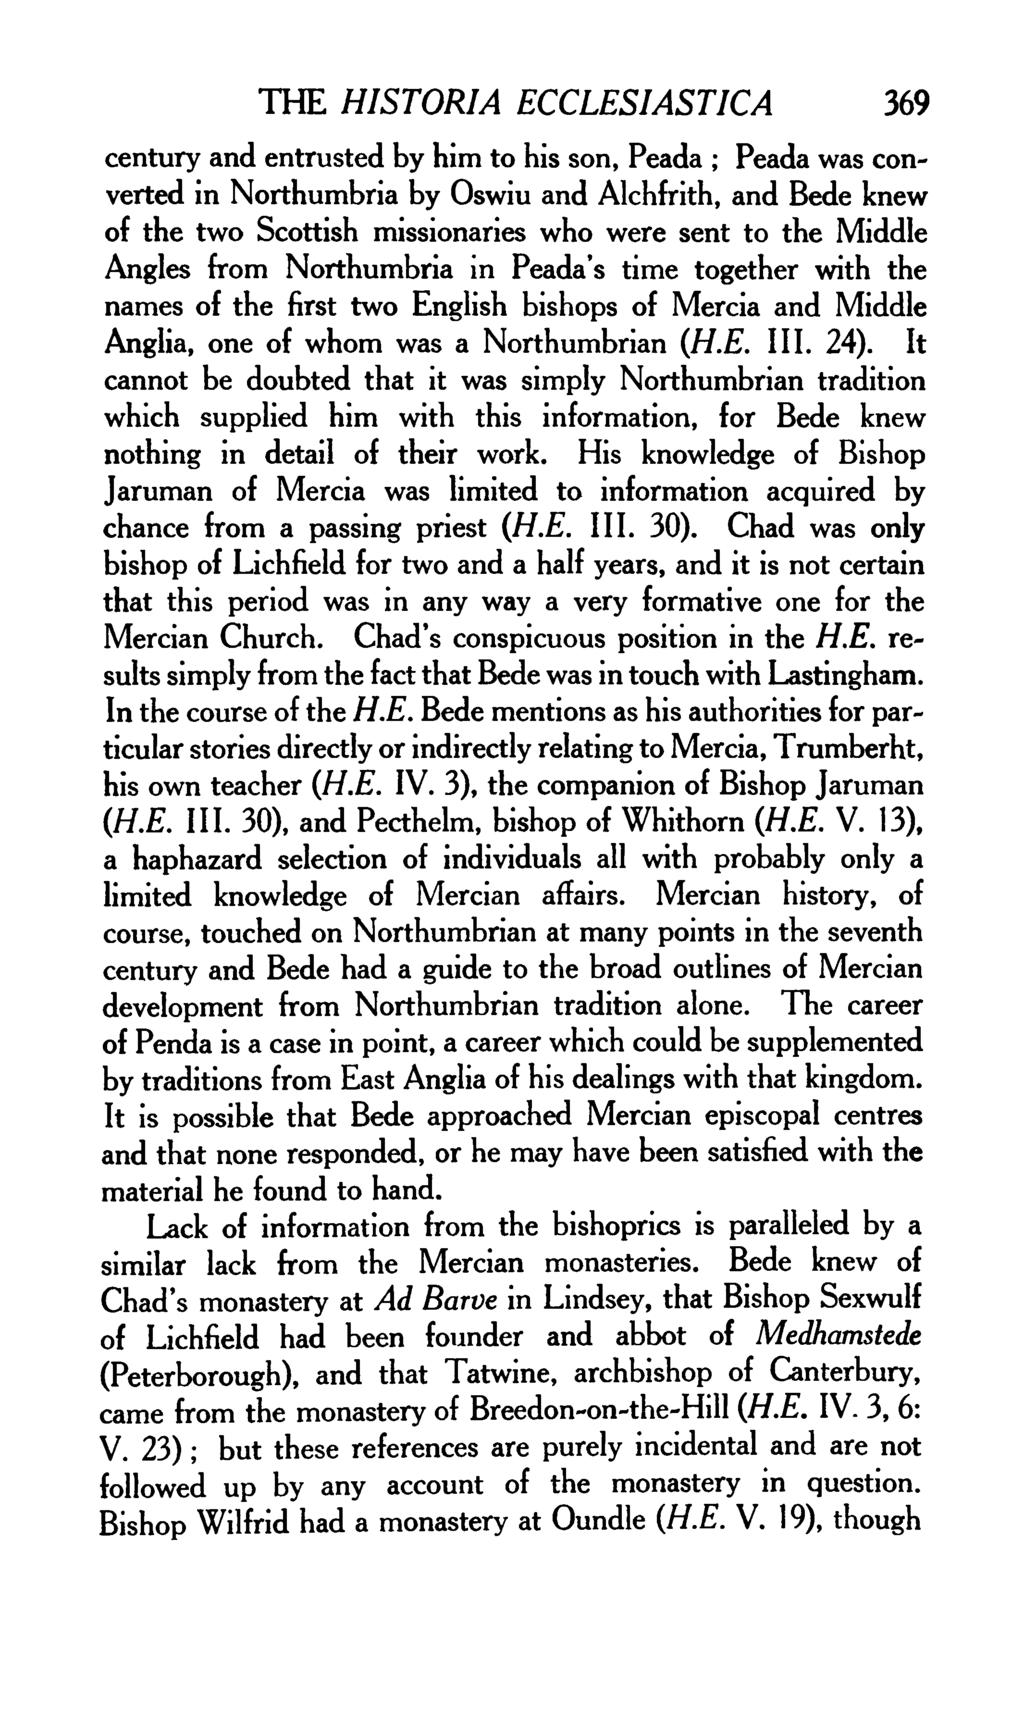 THE HISTORIA ECCLESIASTICA 369 century and entrusted by him to his son, Peada ; Peada was converted in Northumbria by Oswiu and Alchfrith, and Bede knew of the two Scottish missionaries who were sent